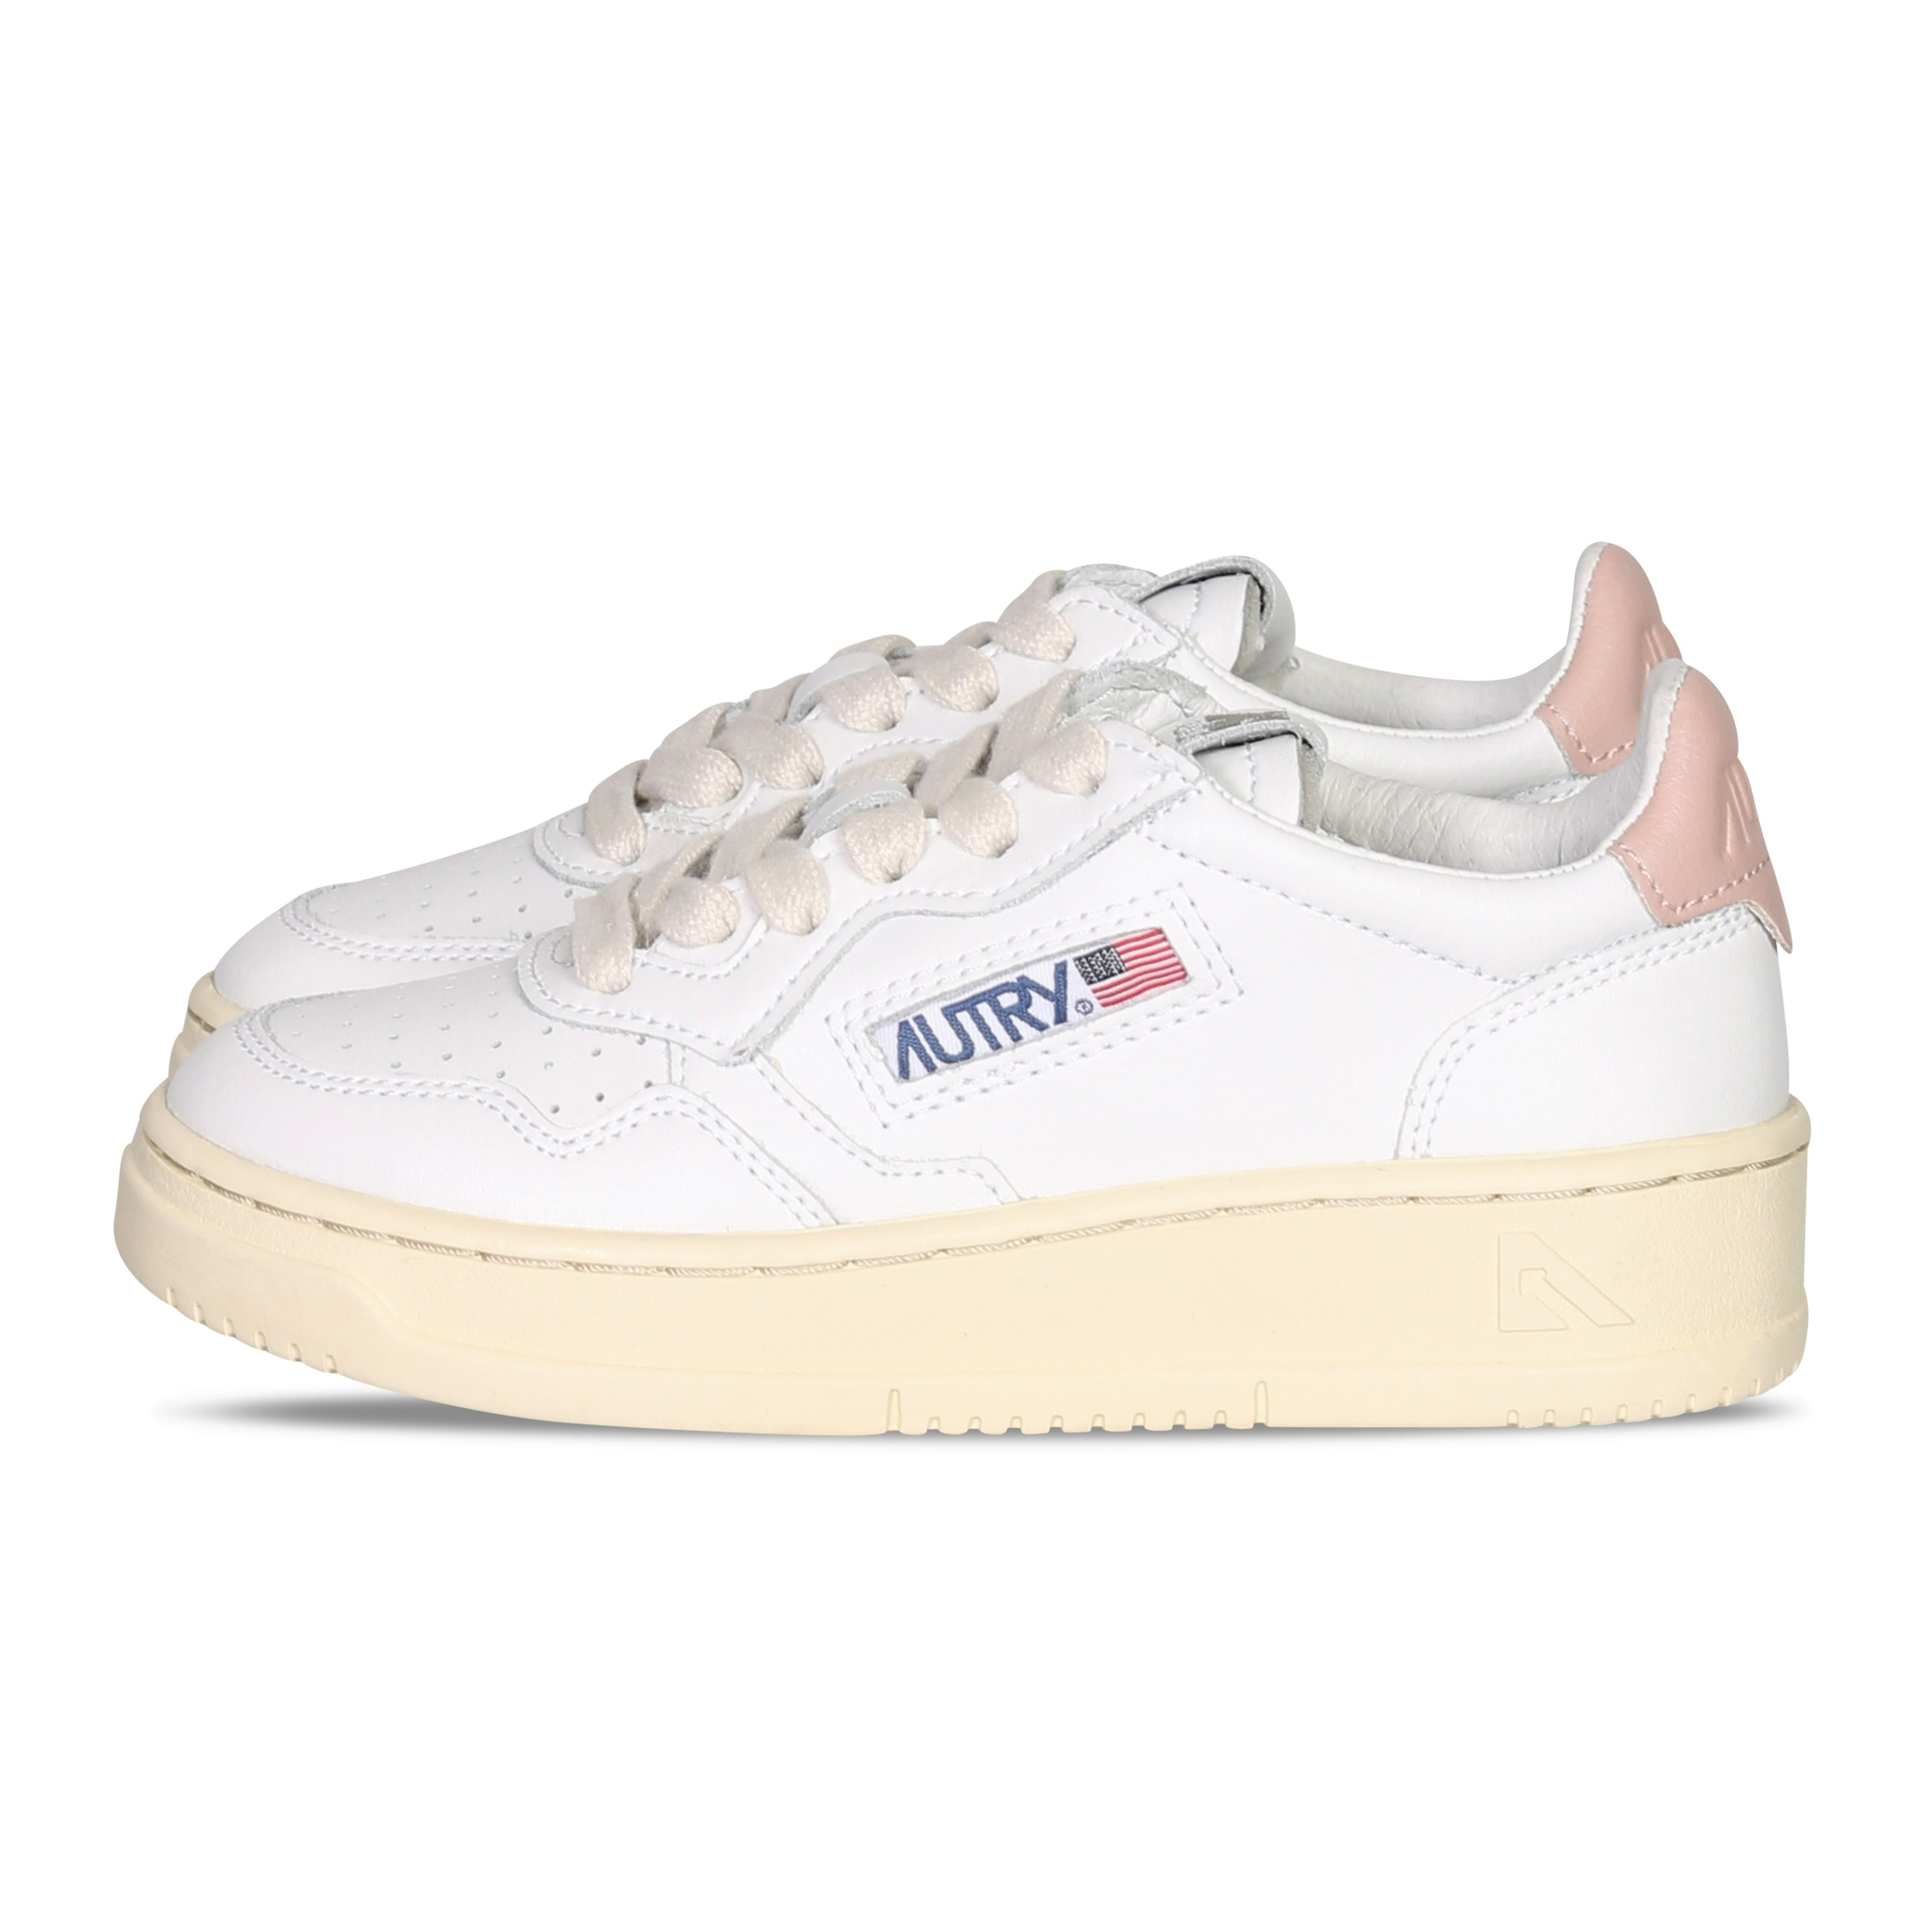 -Kids- Autry Action Shoes Low Sneaker in White/Pink 26